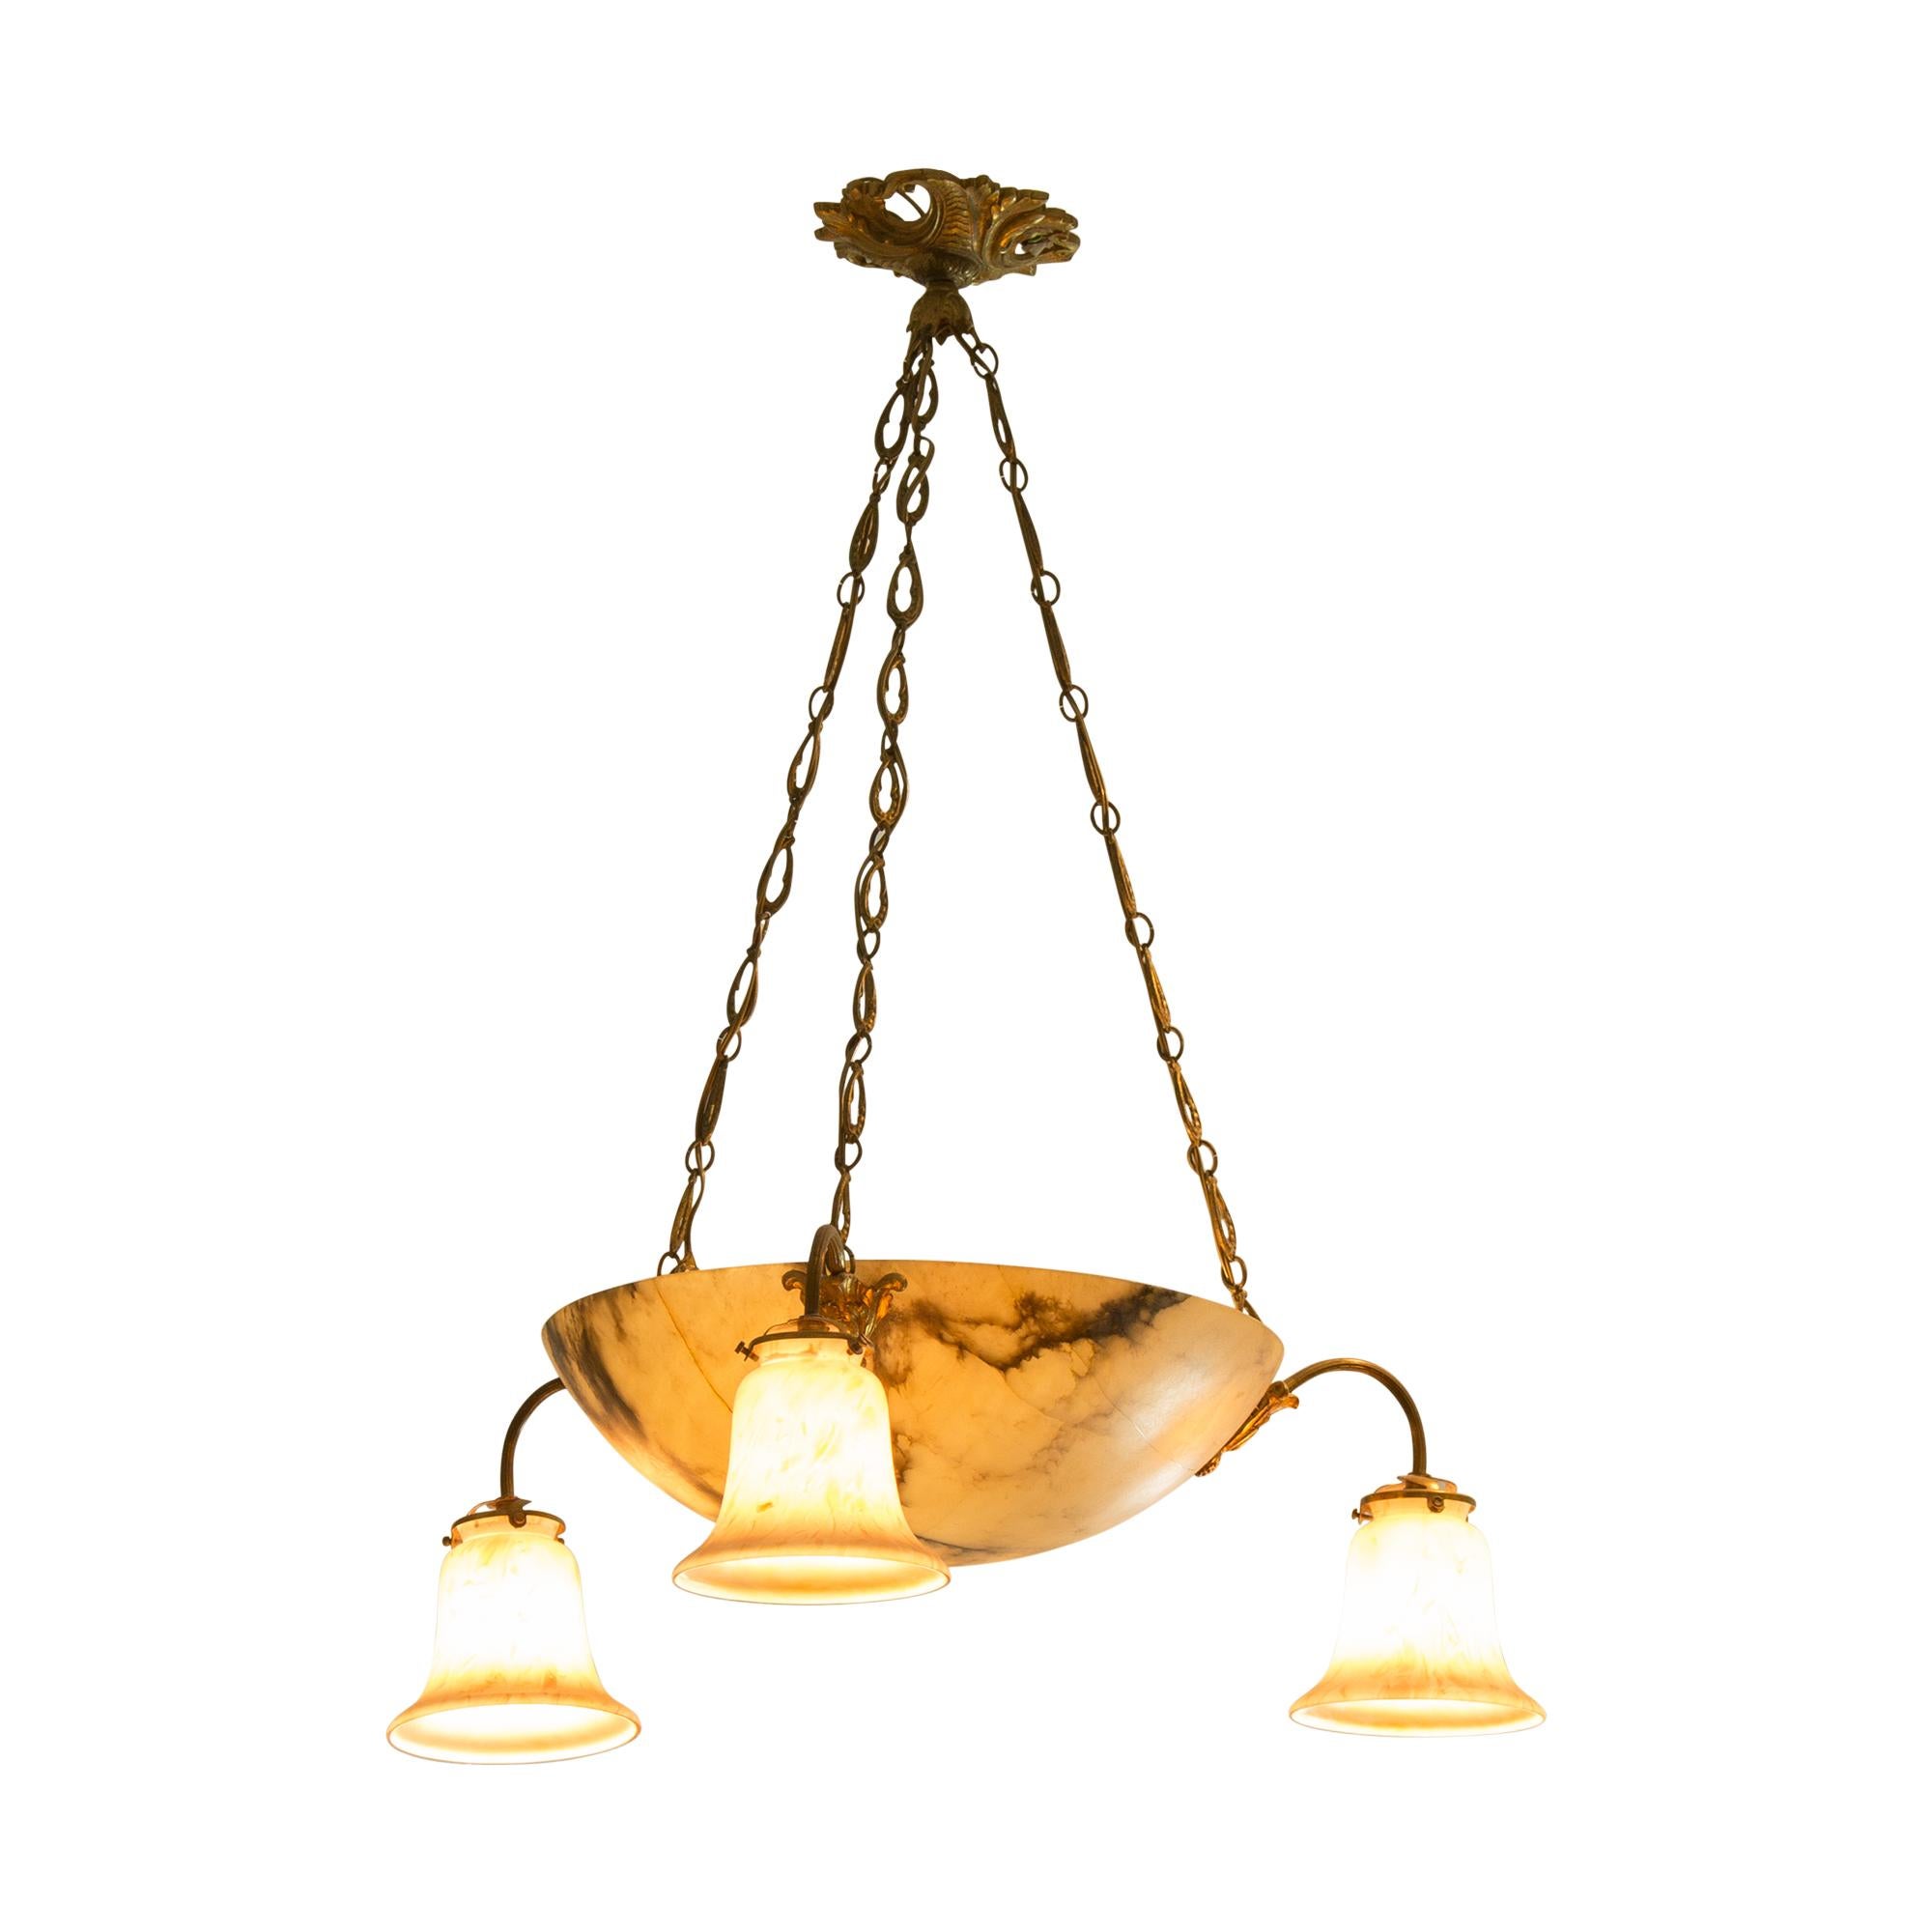 French bronze chandelier from the Art Deco period with alabaster shell shade, suspended from three bronze arms with knotted rope shape. Three curved spots on bronze arms, richly decorated with frosted glass flower shades.